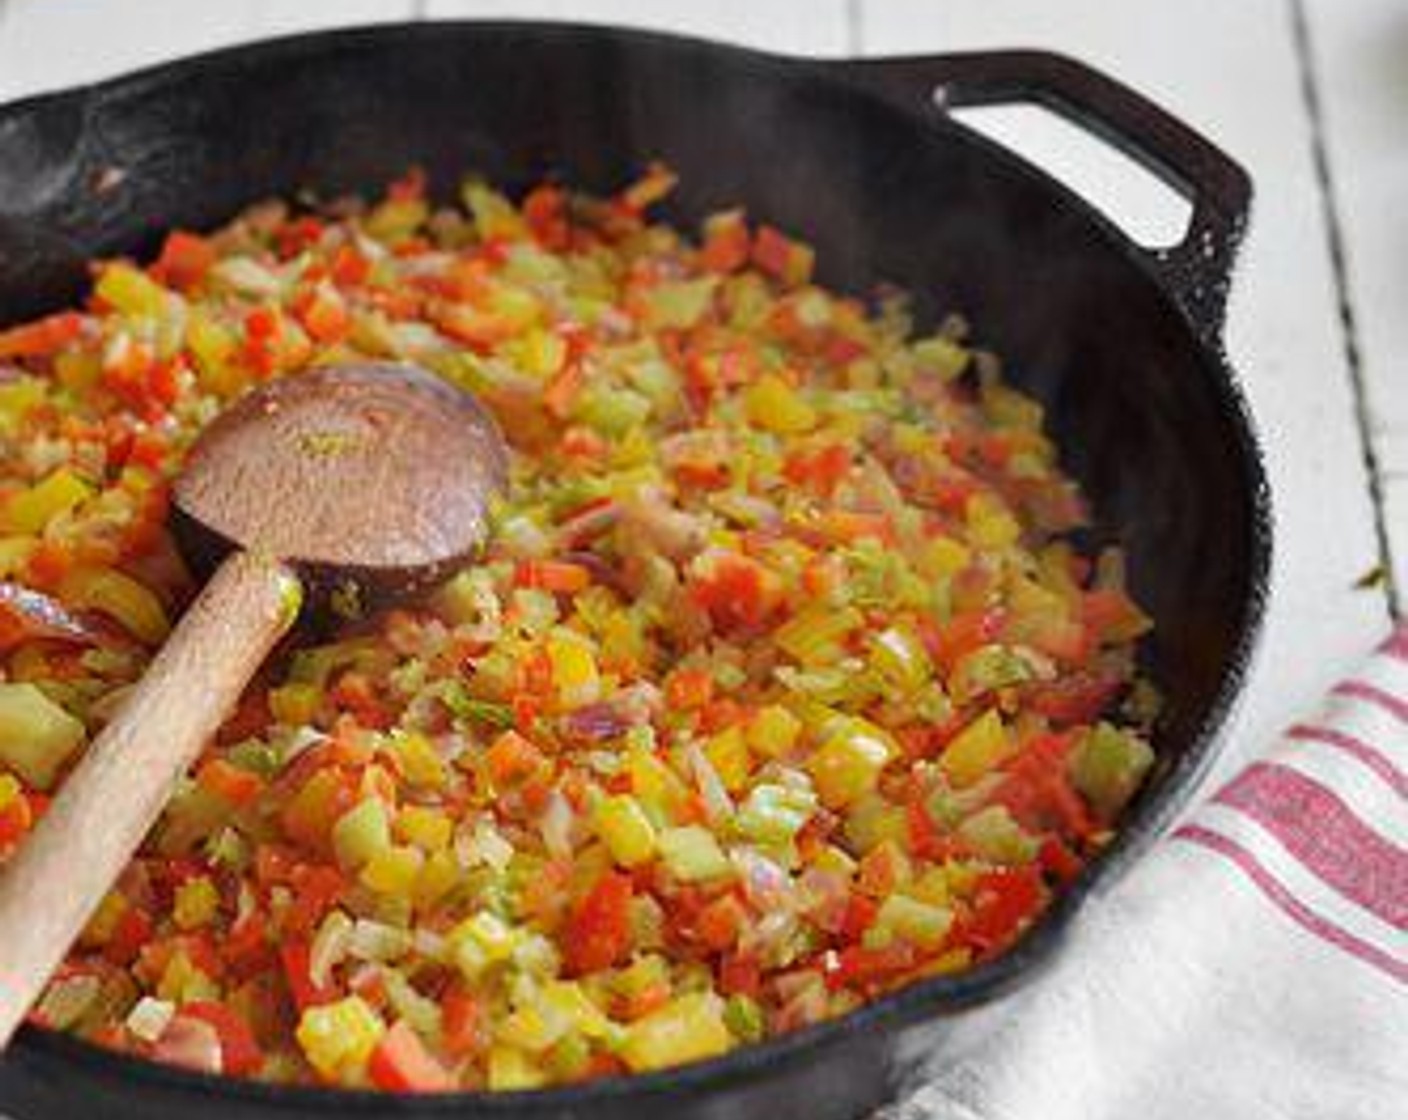 step 6 Cook about 5 to 8 minutes, until the veggies are soft. Season with salt, black pepper, Worcestershire Sauce (1 Tbsp), Hot Sauce (to taste), and Old Bay® Seasoning (1/2 Tbsp). Cook a few minutes longer. Remove from the heat, transfer to a bowl